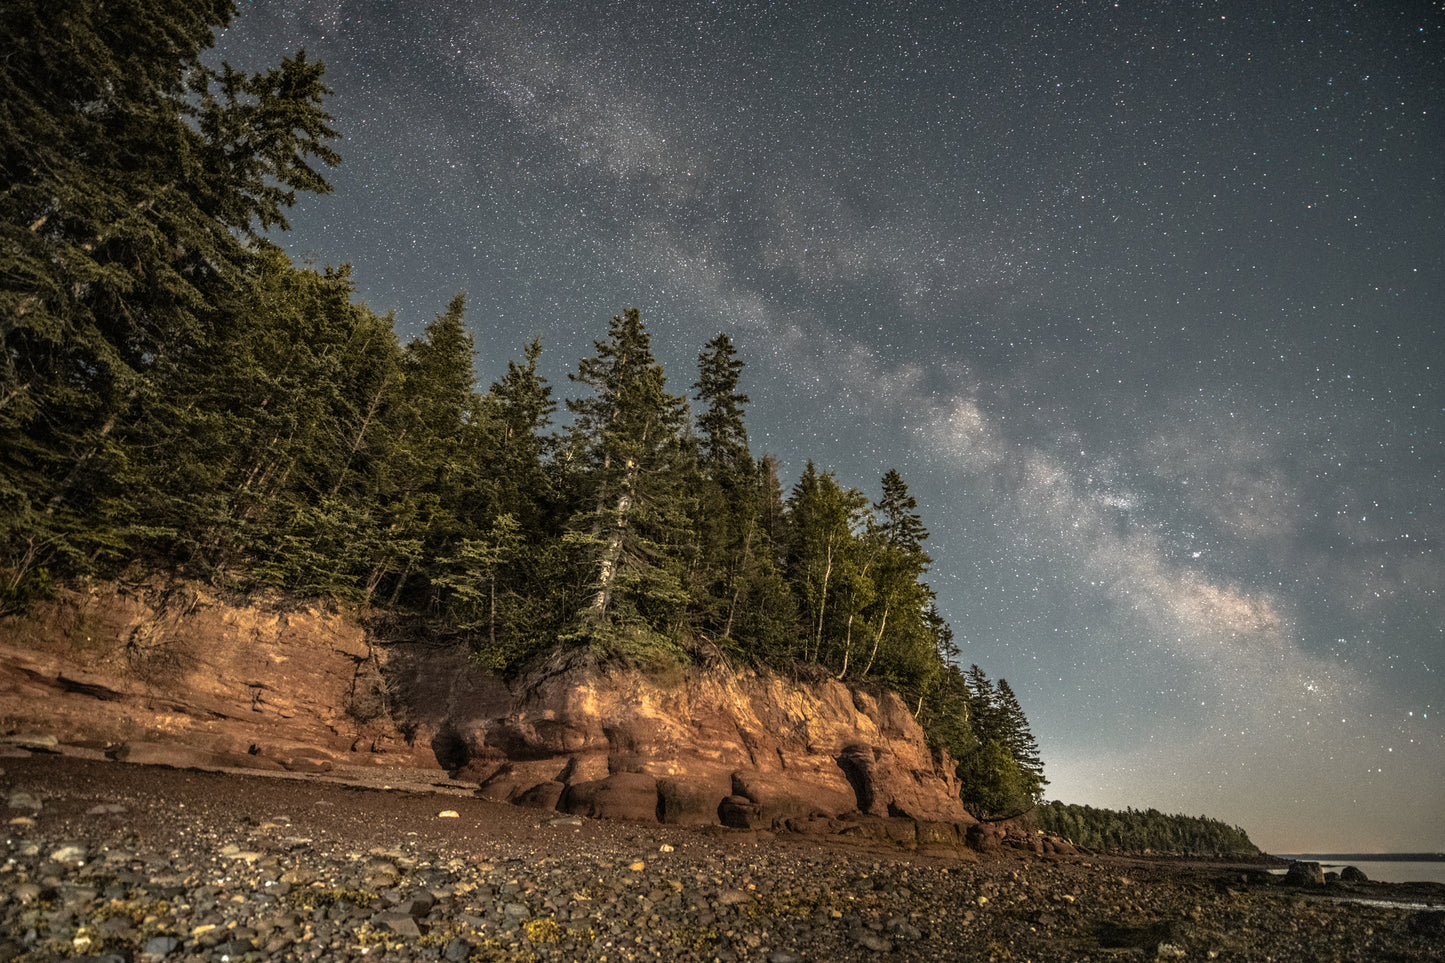 Bay of Fundy Nightscape